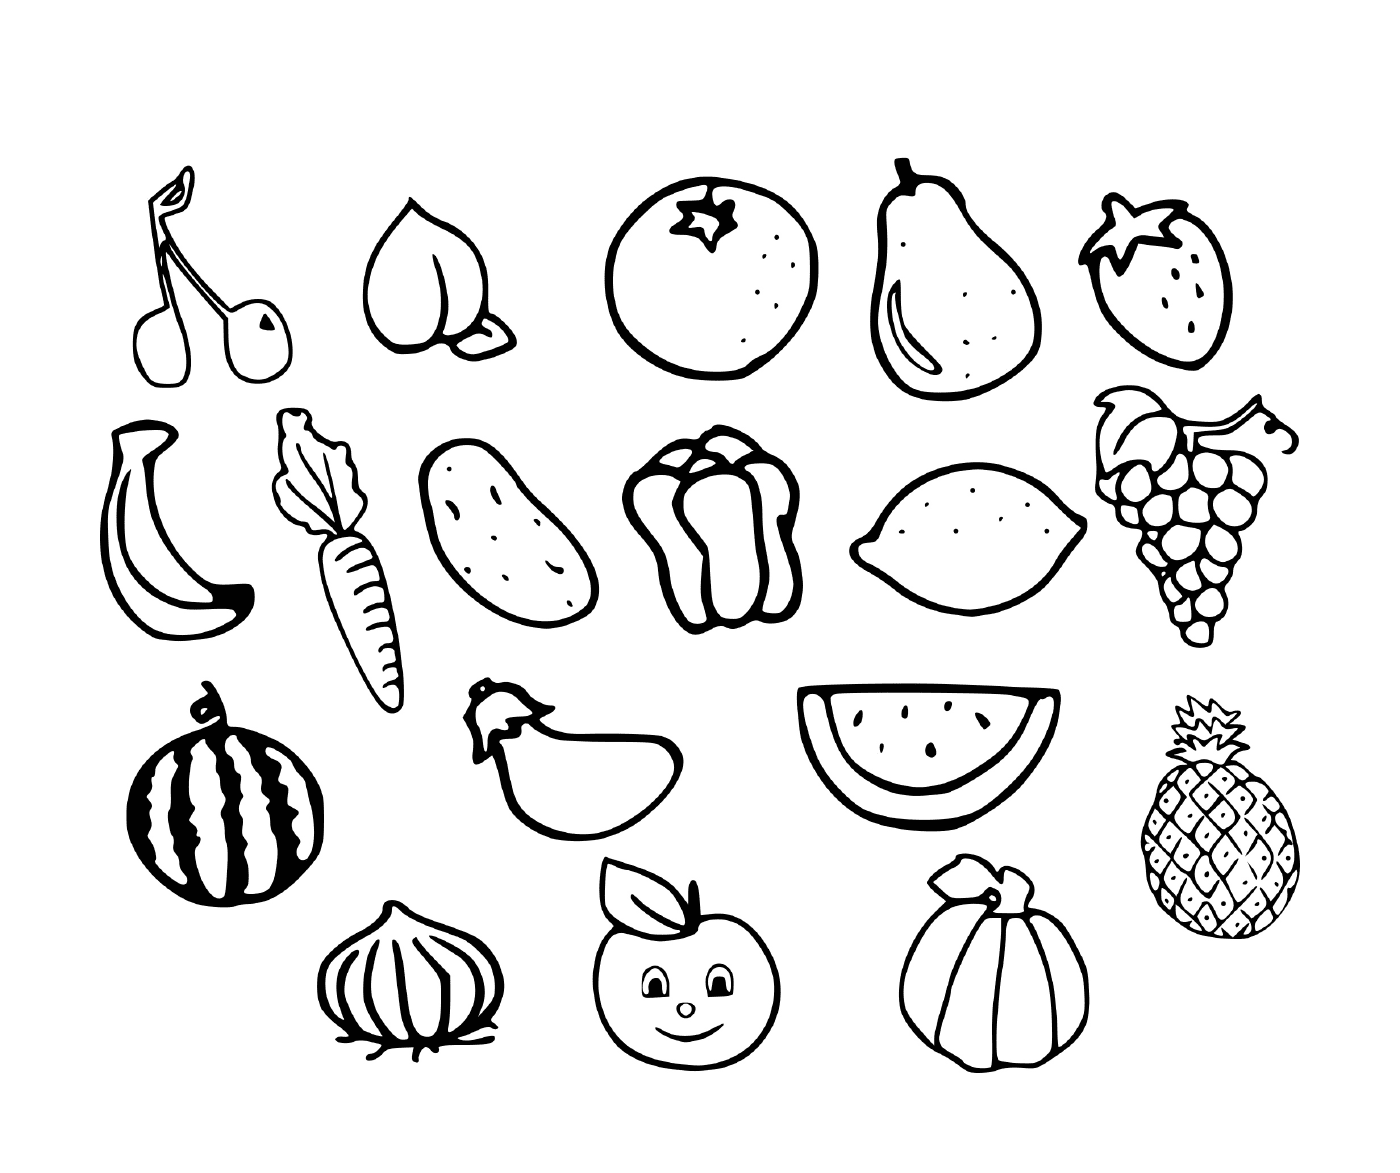  Fruit and vegetables drawn 